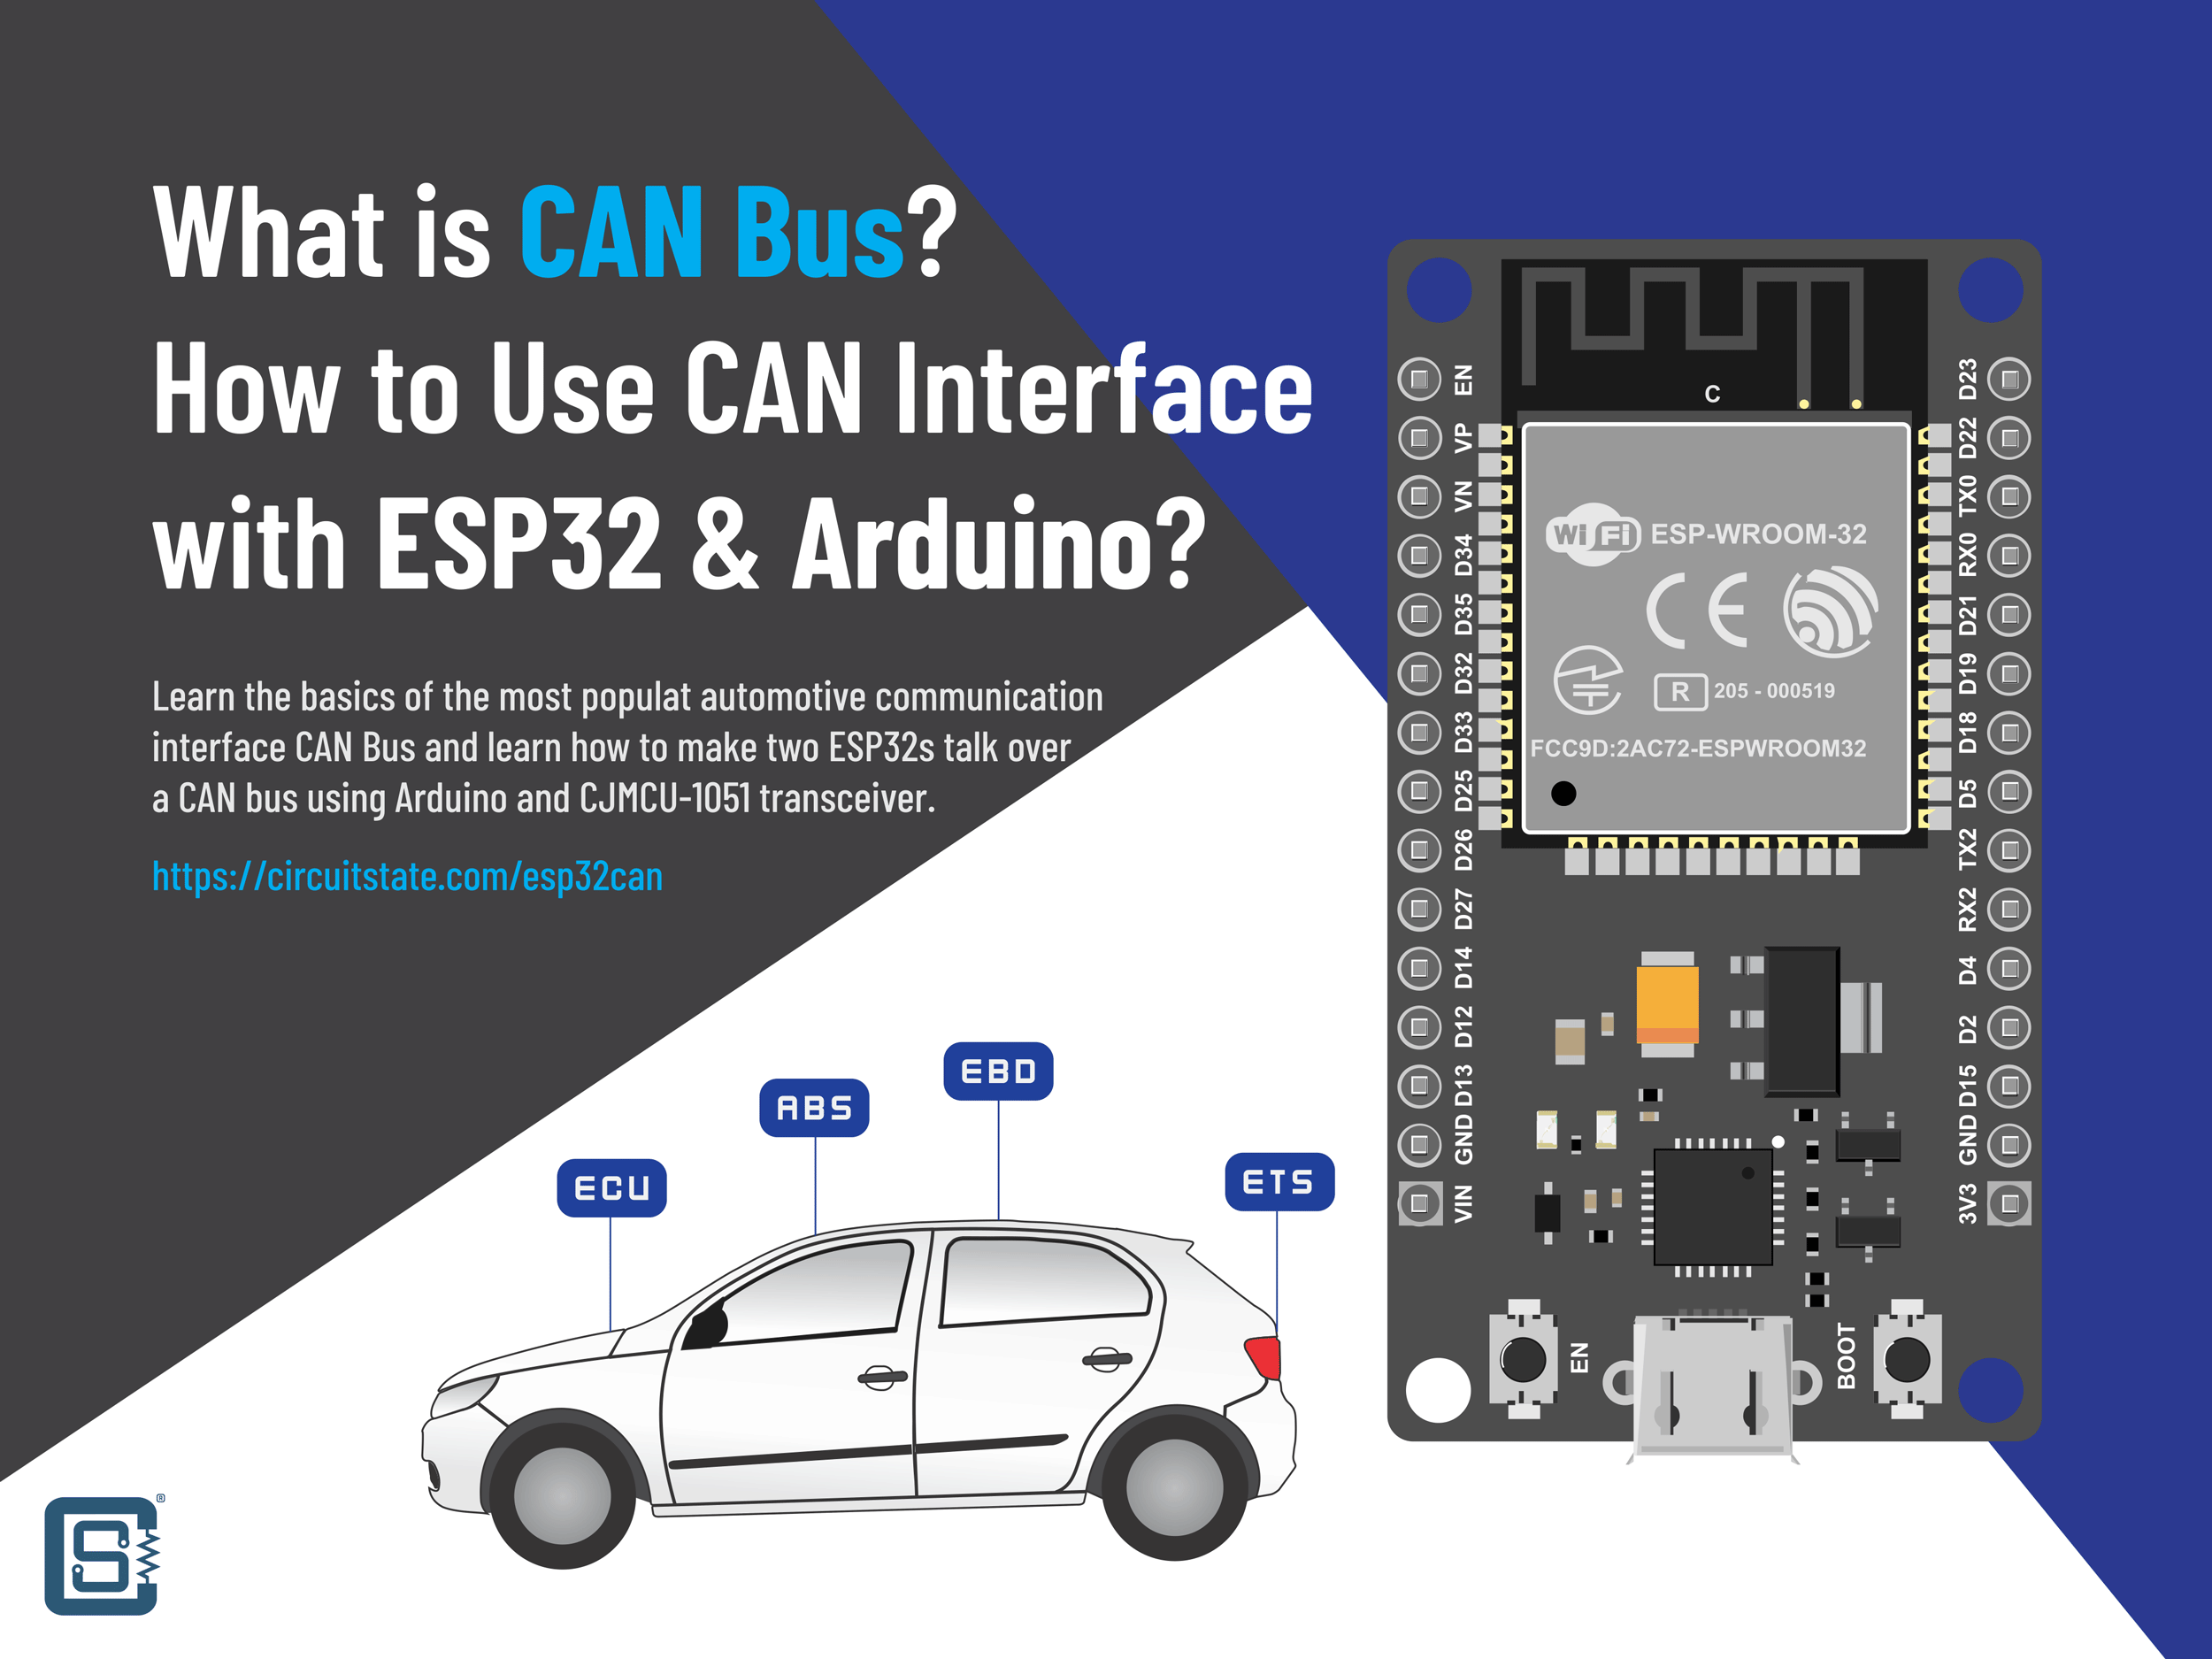 https://circuitstate.com/wp-content/uploads/2023/01/What-is-CAN-Bus-and-How-to-Interface-with-ESP32-and-Arduino-Featured-Image-CIRCUITSTATE-Electronics-01.png